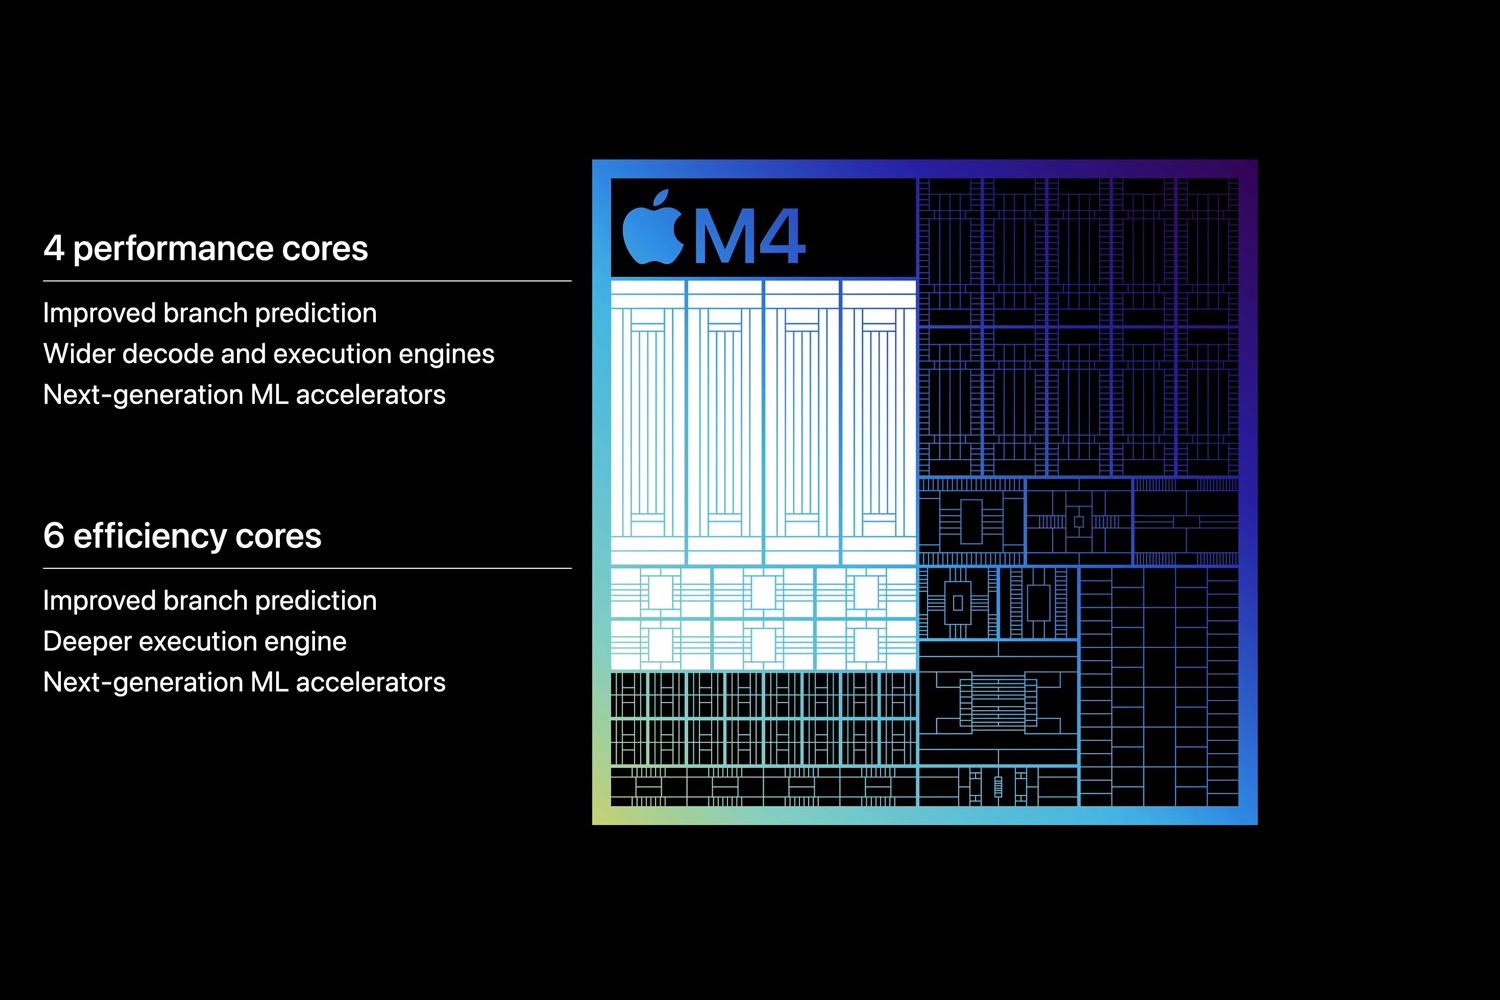 A slide from Apple's May 7, 2024 event showing the M4 chip and its internal cores, broken into performance cores and efficiency cores.